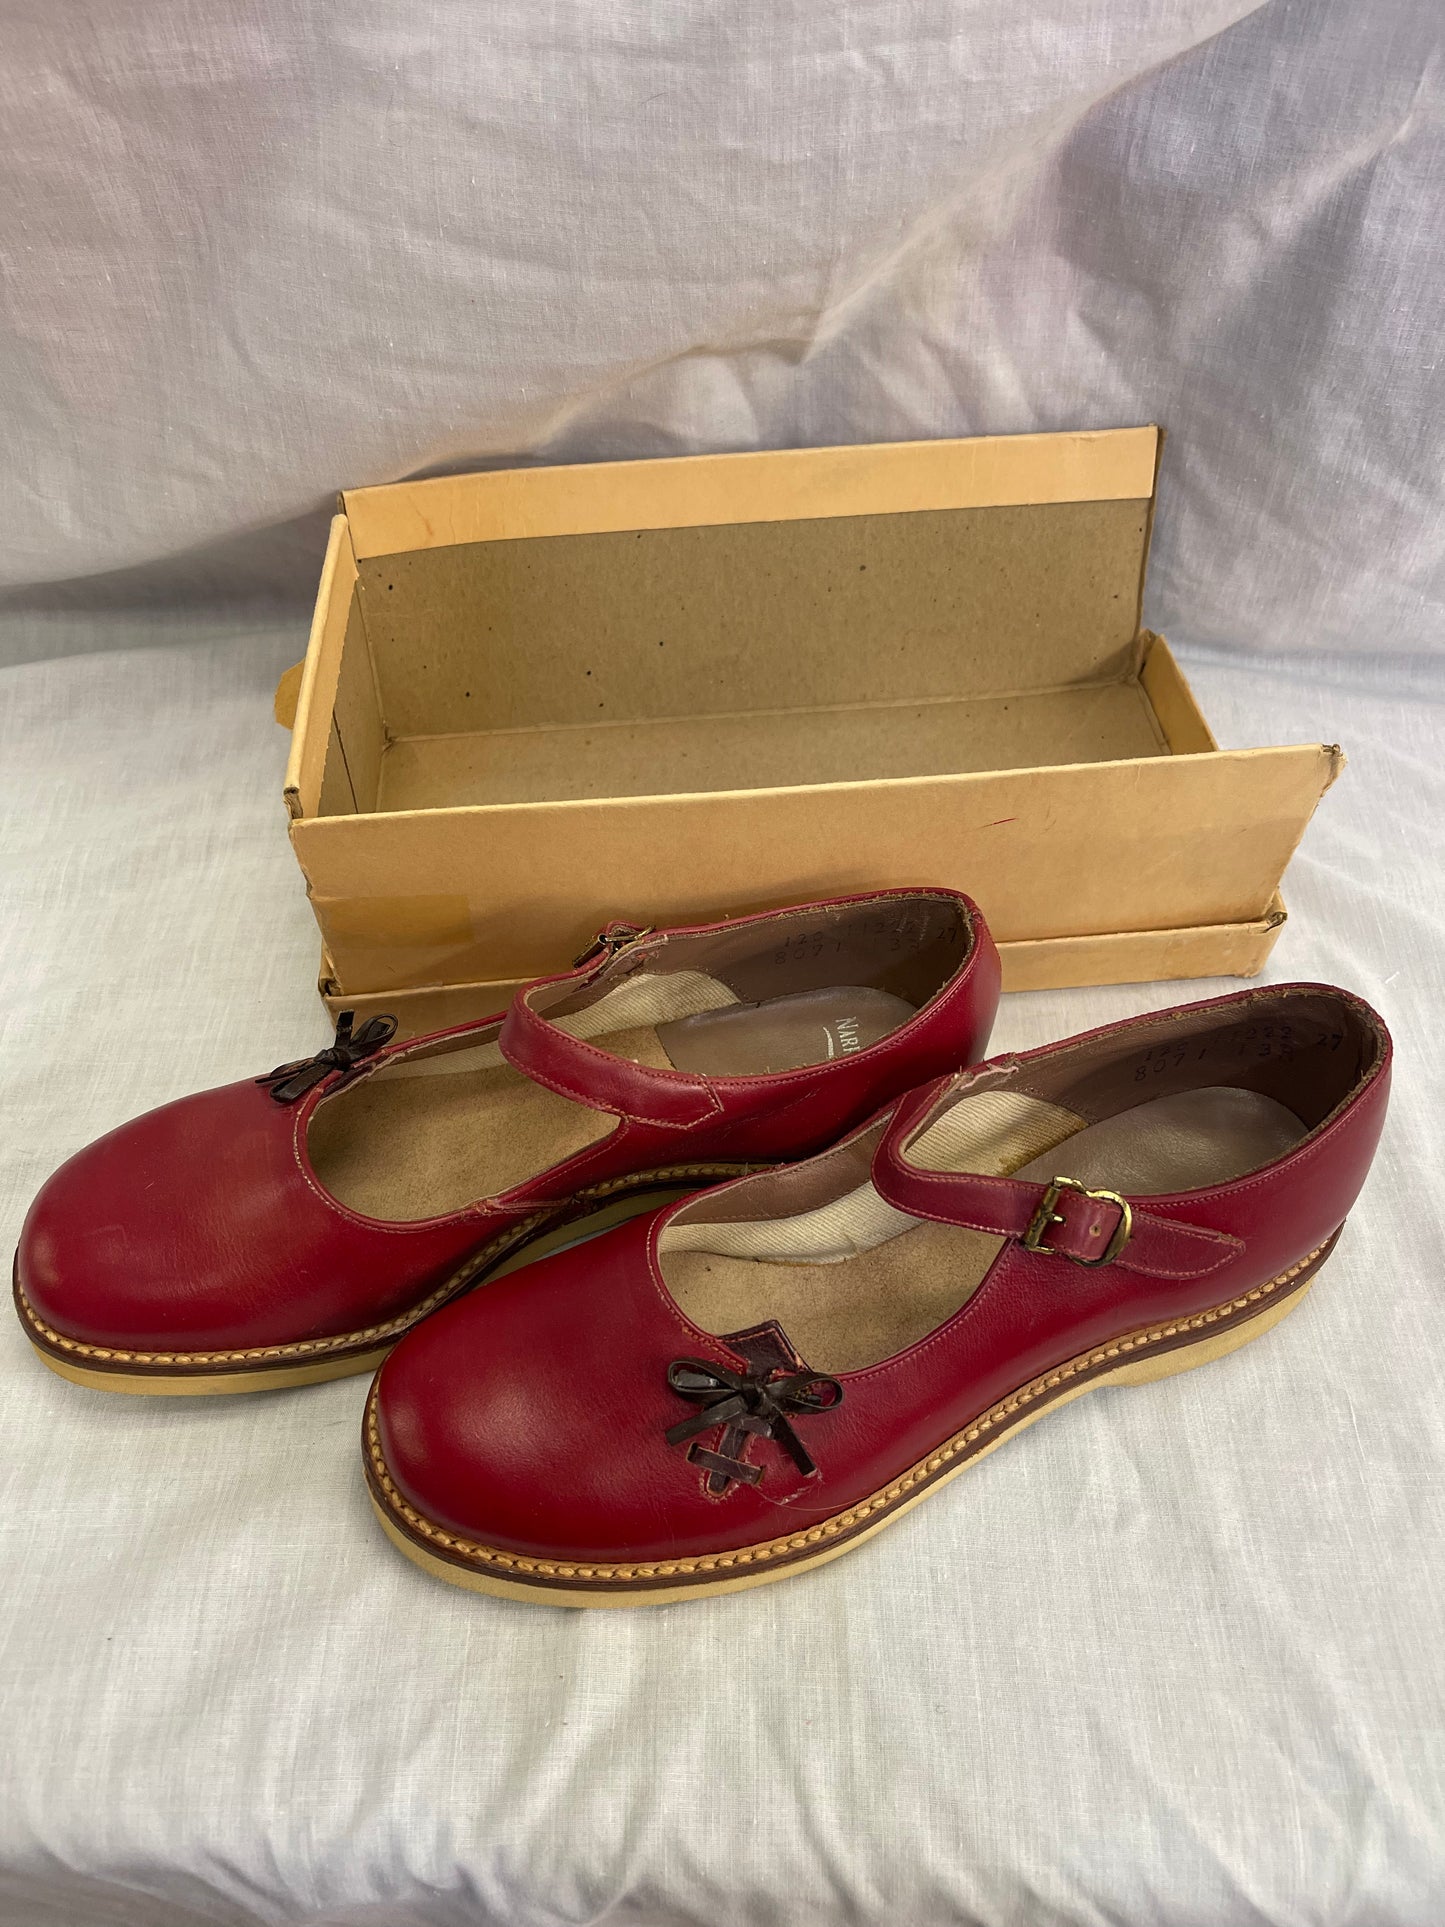 Poll-Parrot Girl’s Red Leather Shoes